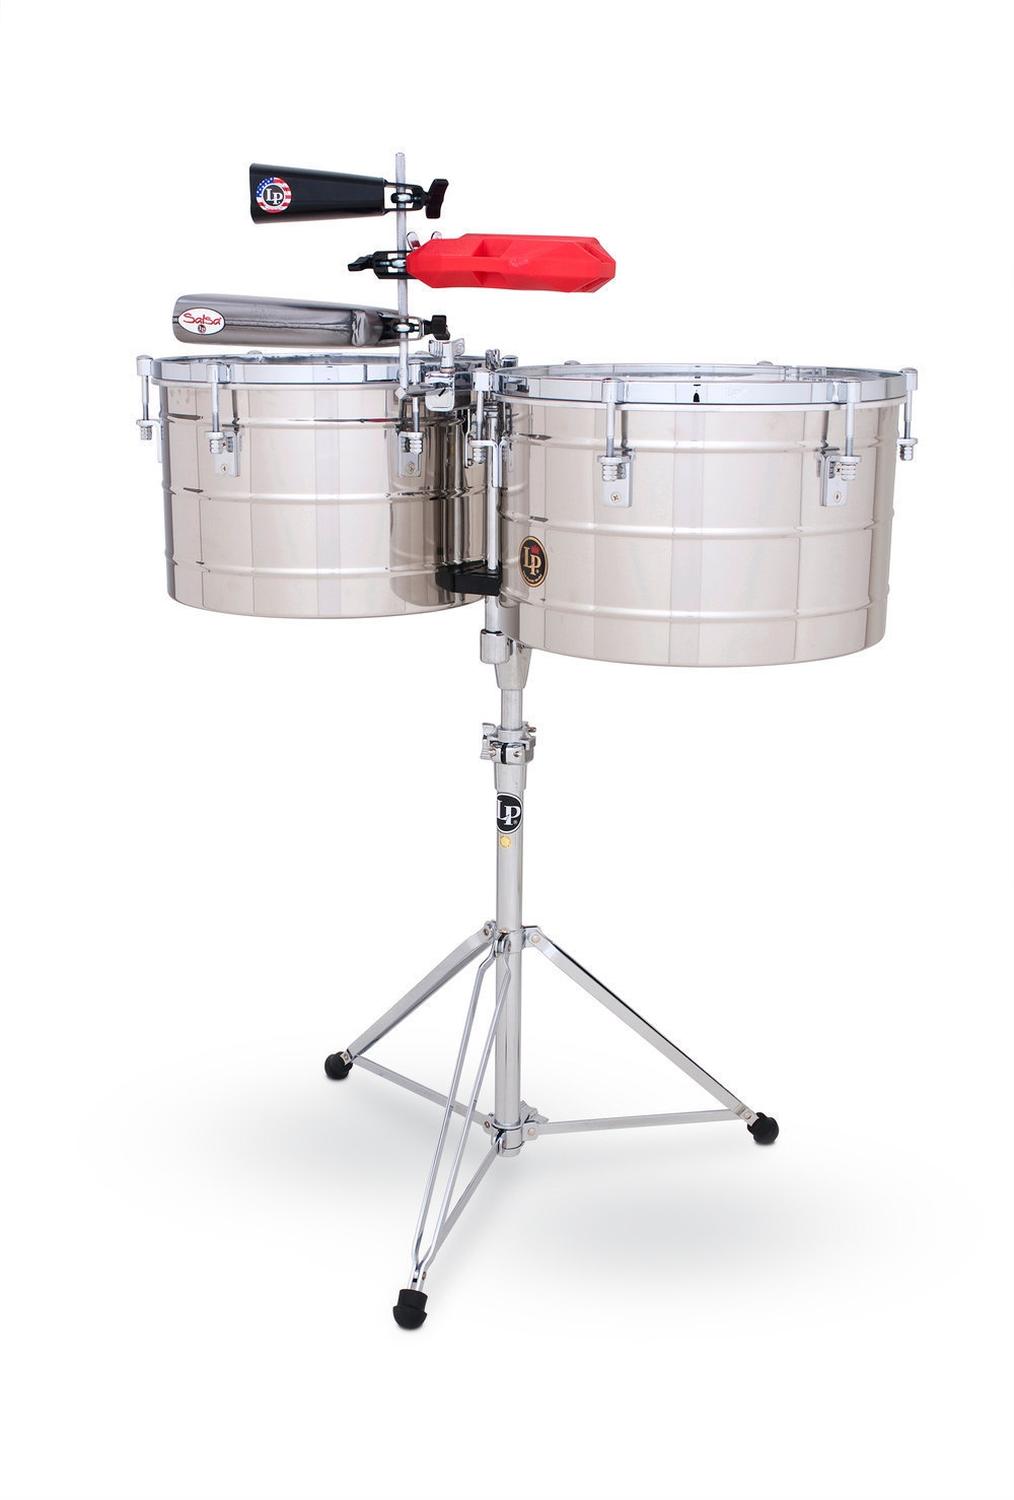 Timbales LP Tito Puente 15 - 16" Cromados LP258-S LATIN PERCUSSION